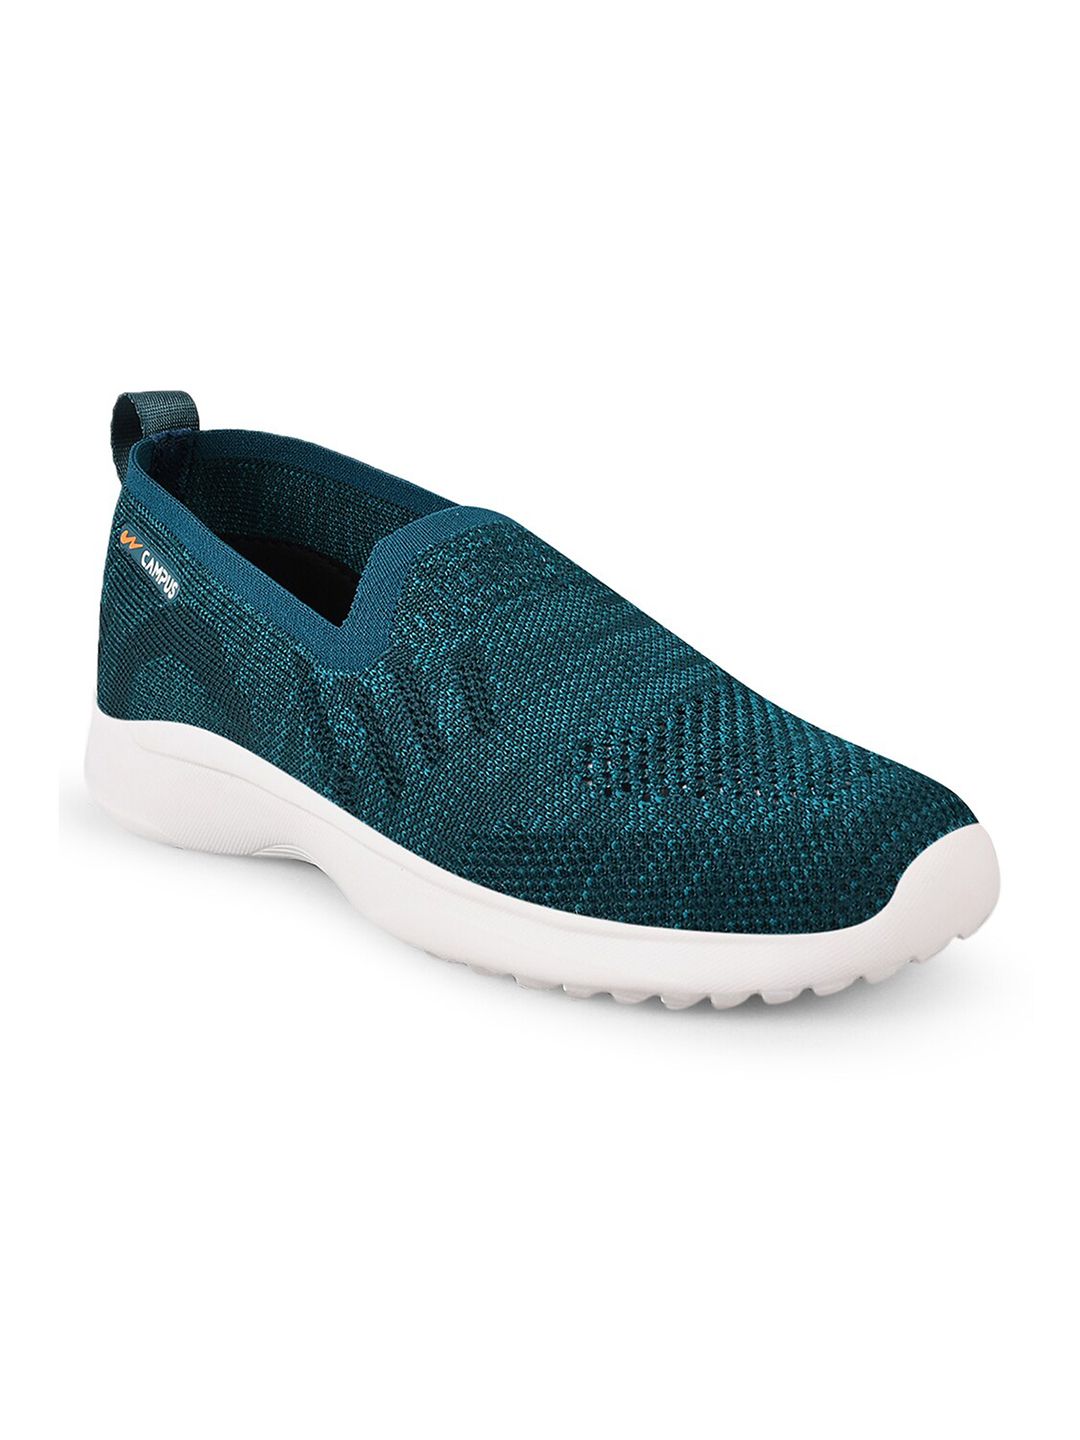 Campus Women Teal Slip-On Mesh Running Shoes Price in India